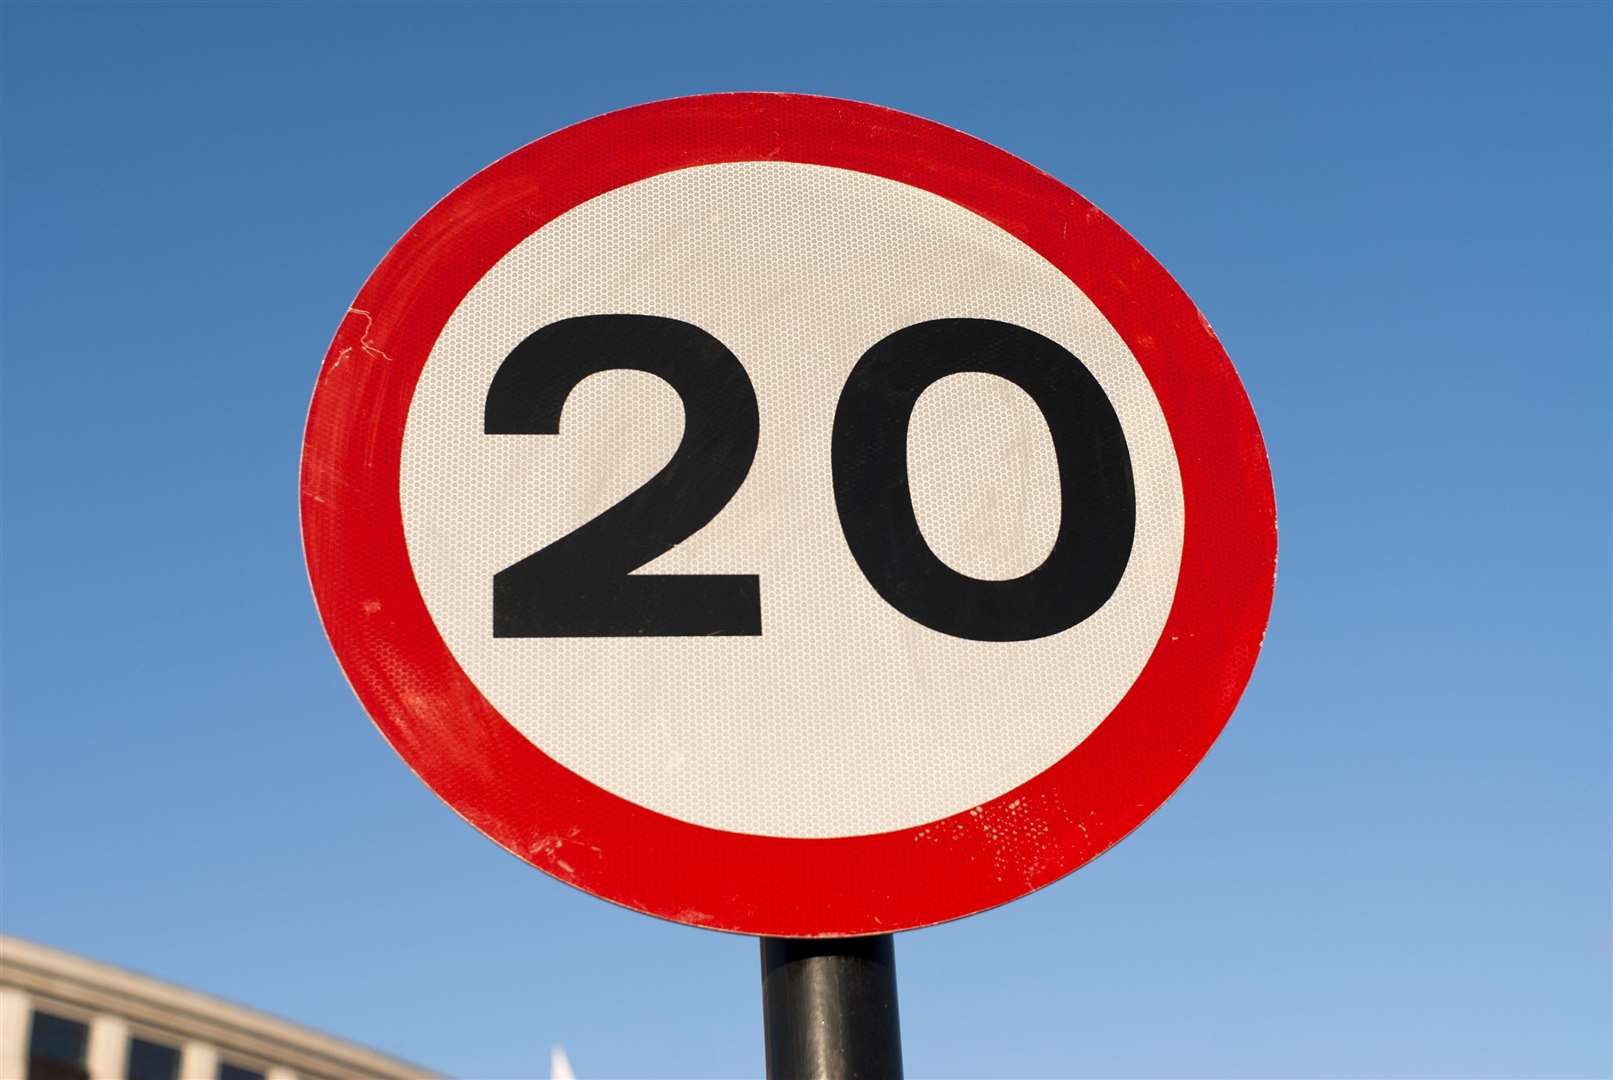 Councillors Sonya Warren and Theresa Coull have called for a report on the roll out of 20mph limits in Moray.